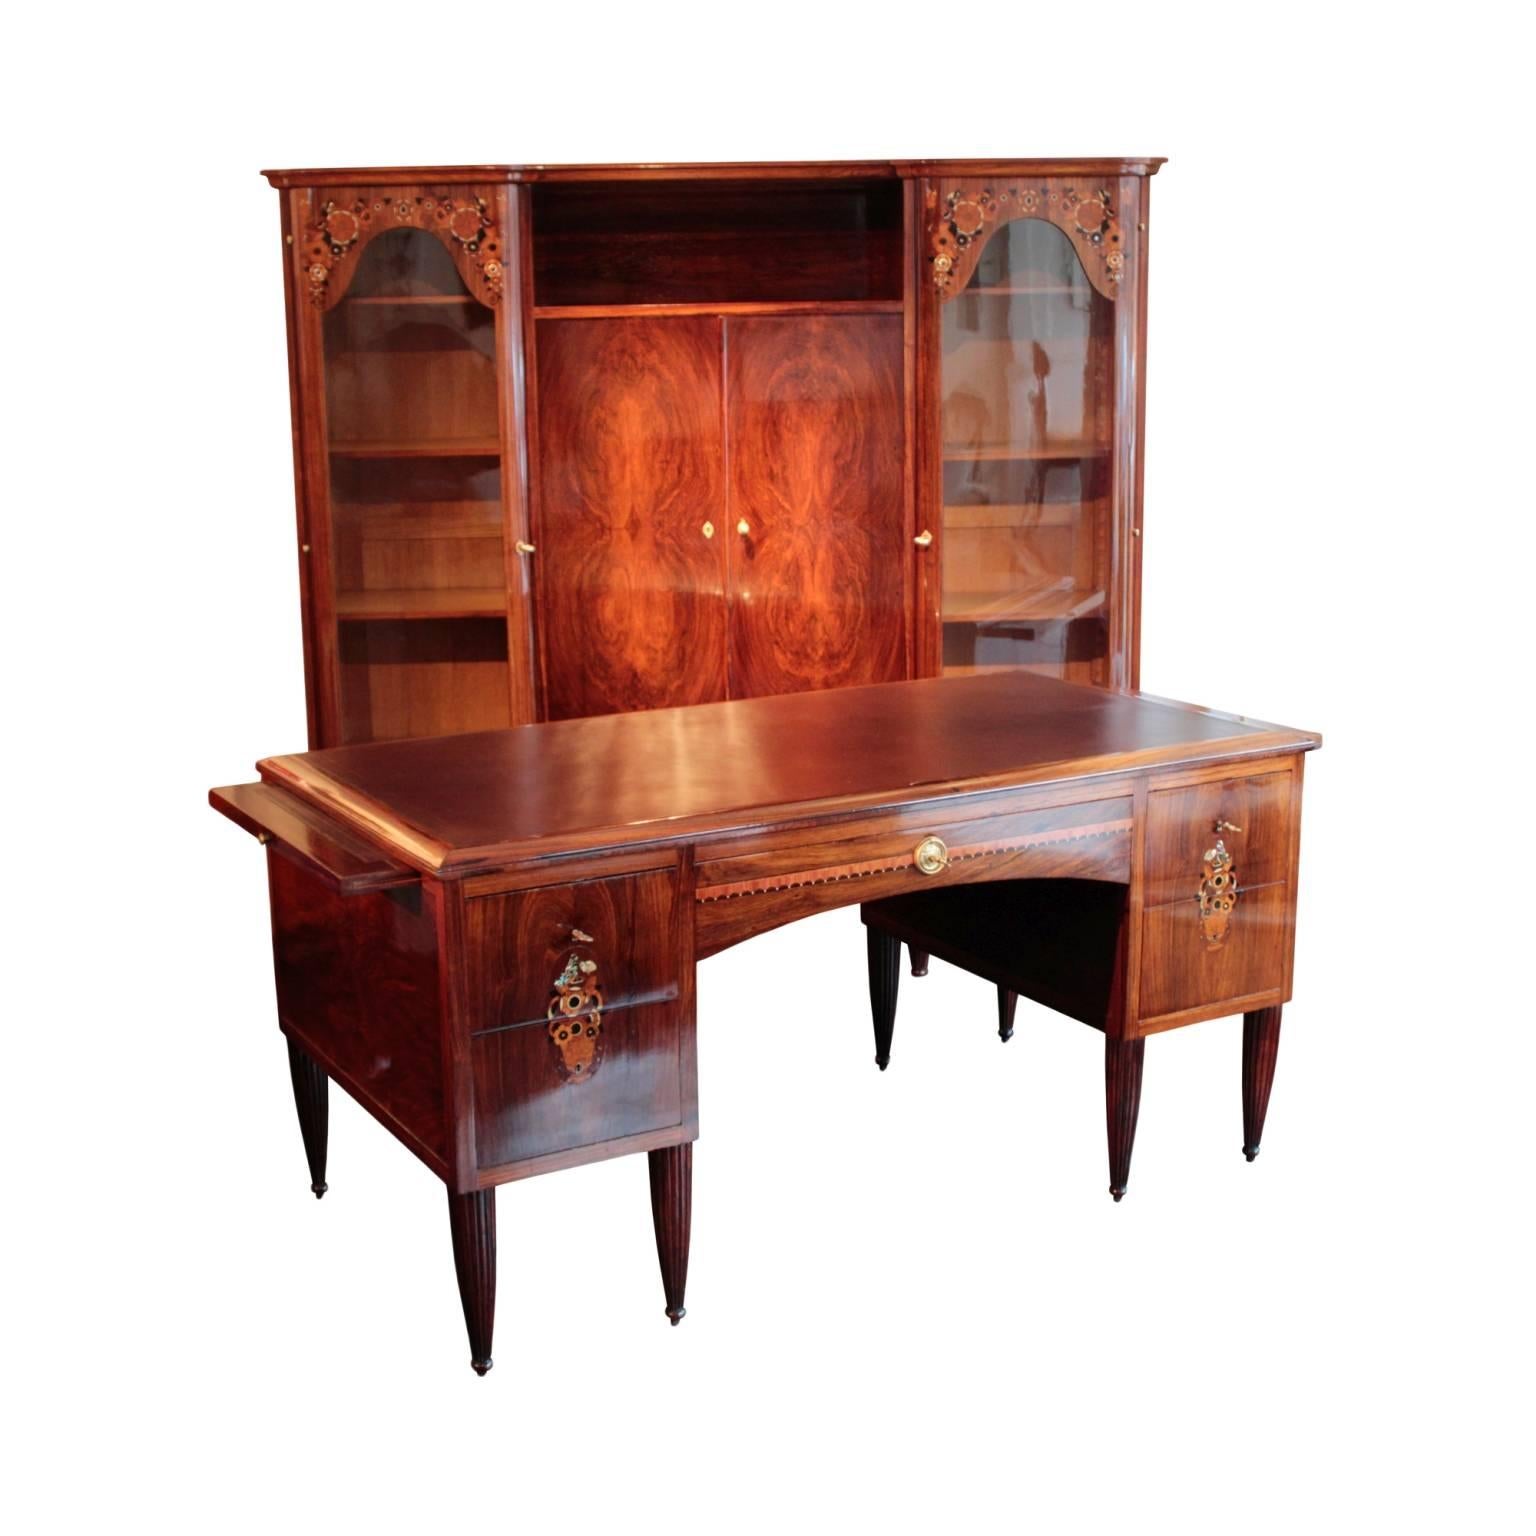 Bronze French Early Art Deco Vitrine Bookcase, attributed to Maurice Dufrene For Sale